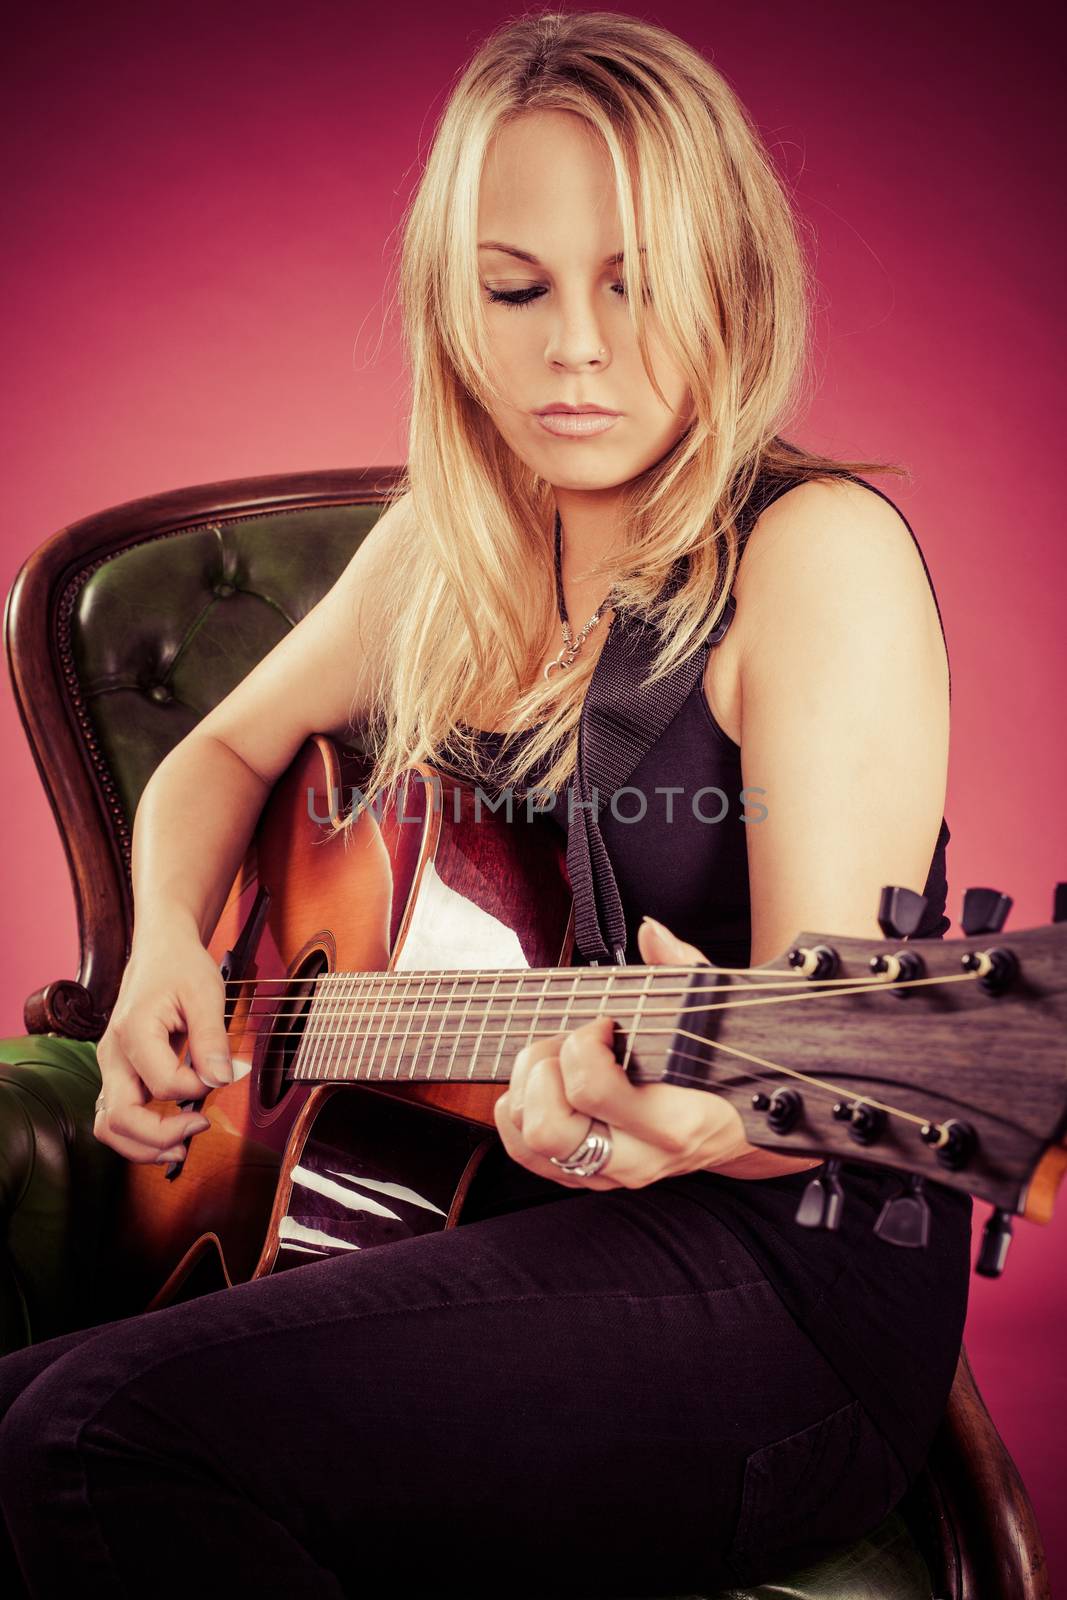 Blond woman sitting and playing guitar by sumners